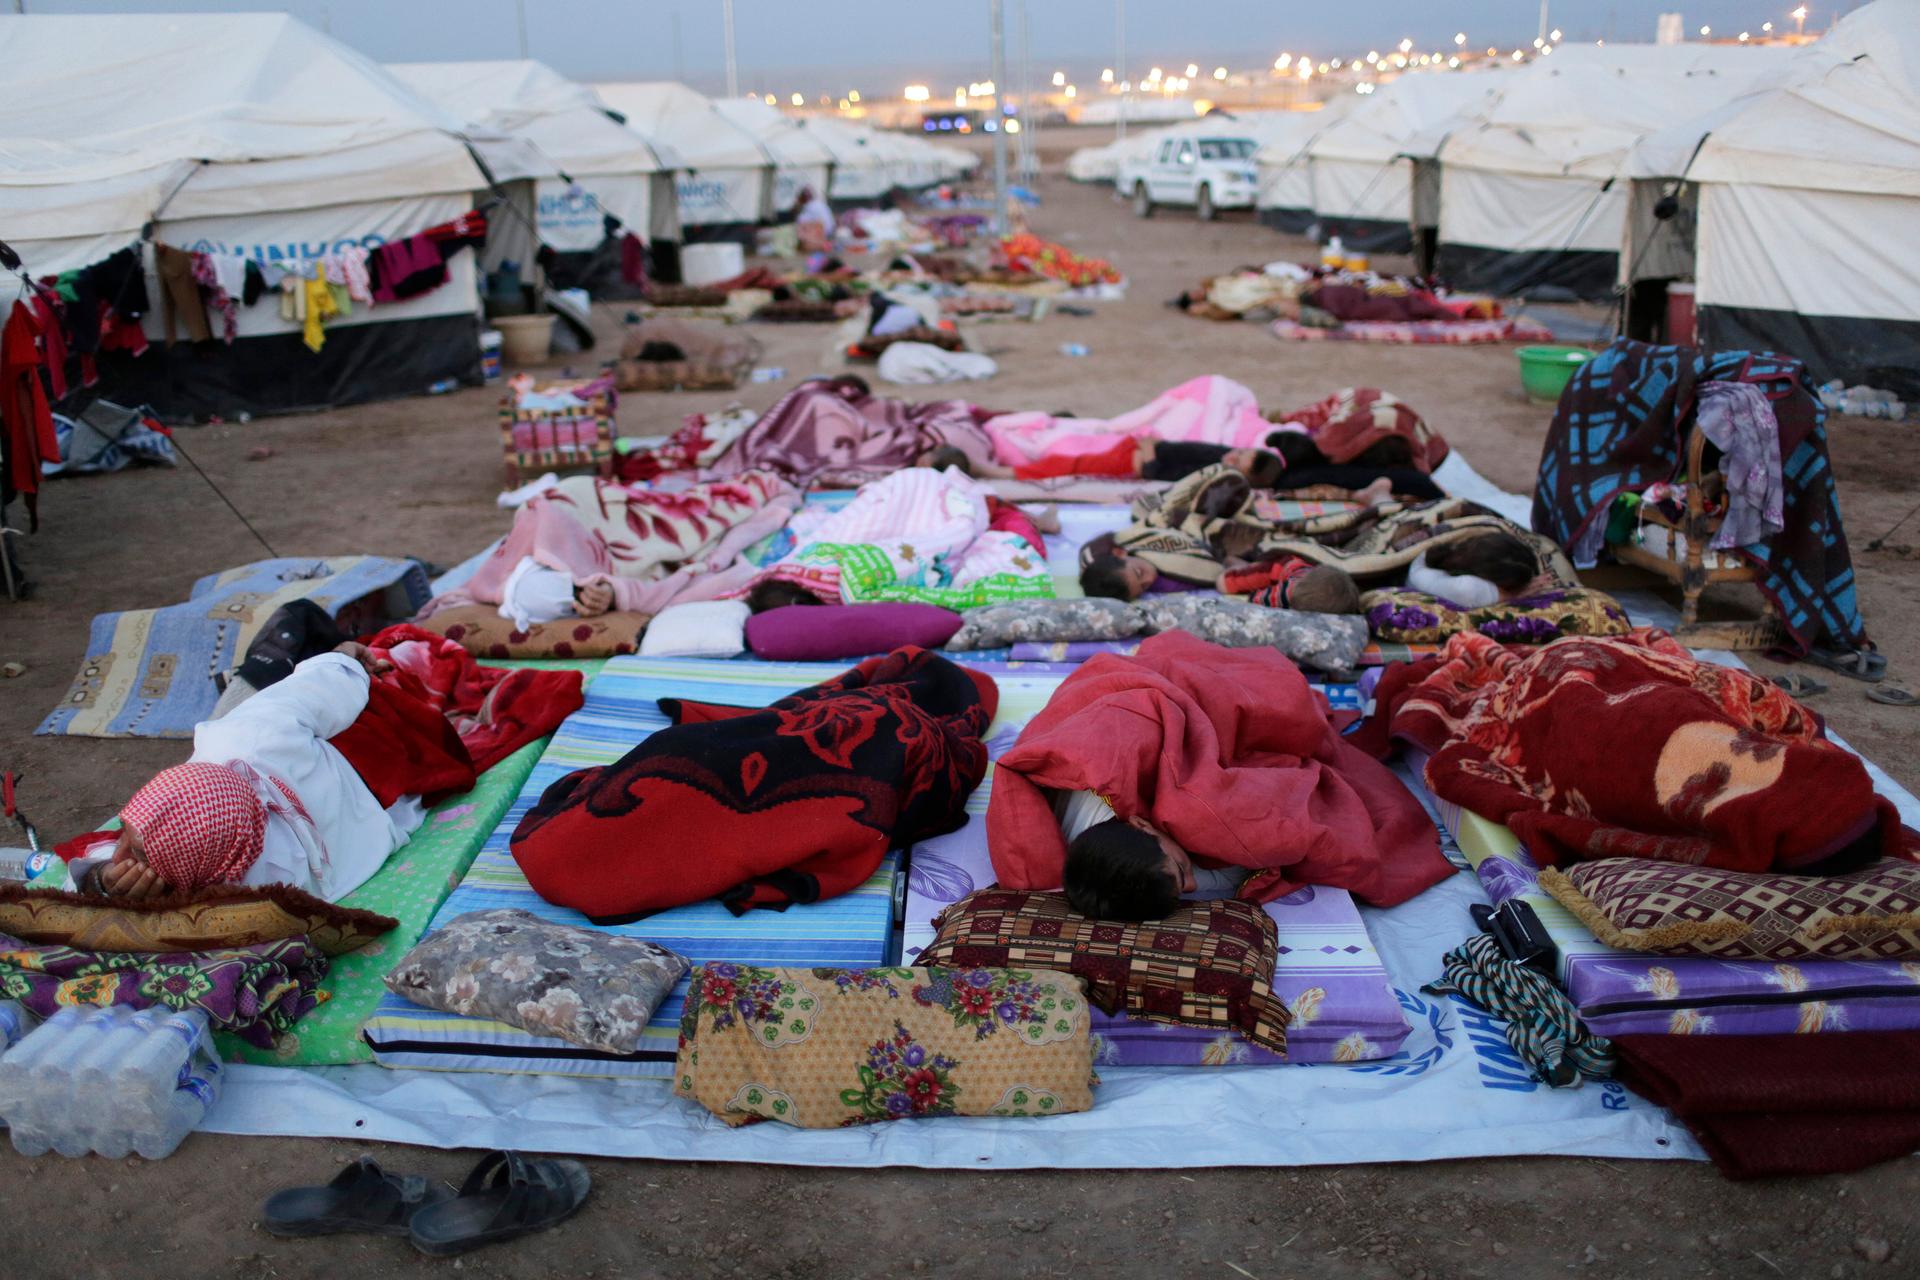 Displaced people from the minority Yazidi sect, who fled violence in the Iraqi town of Sinjar, sleep on the ground at the Bajed Kadal refugee camp in southwest Dohuk province on August 23, 2014.